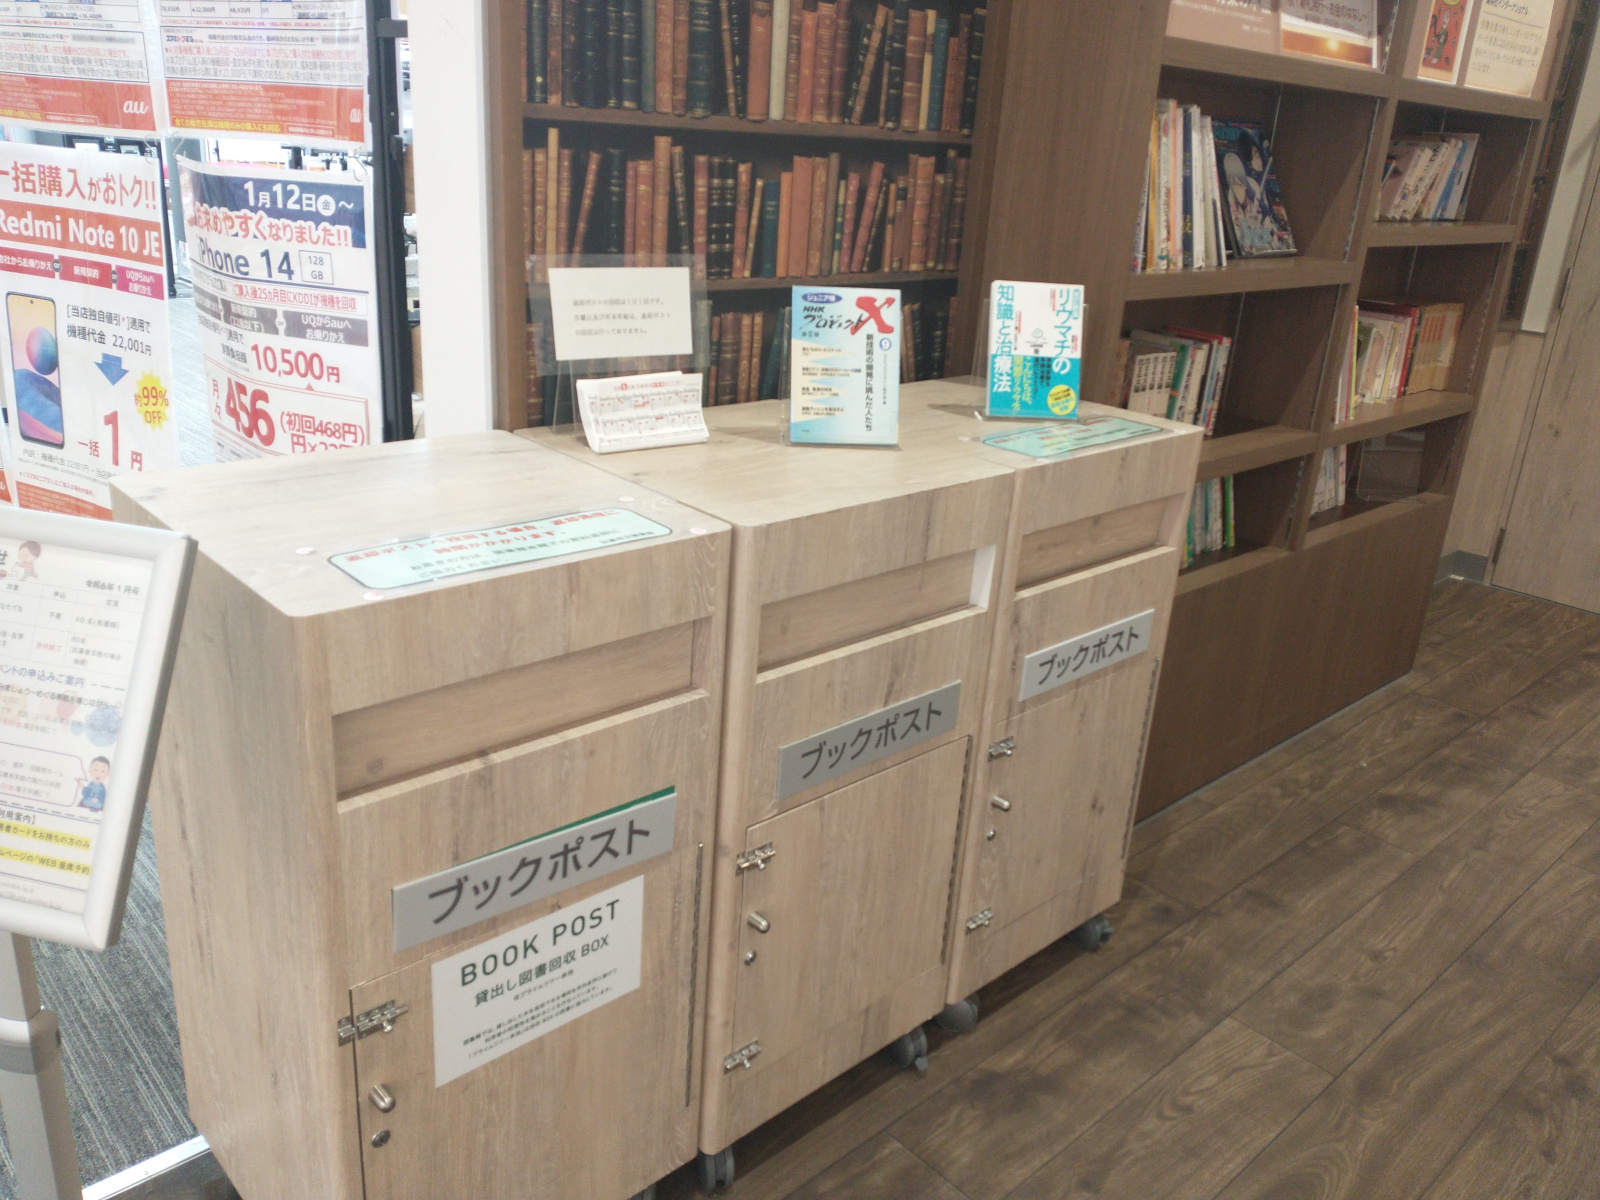 Three “book boxes” for return of borrowed books, standing in a small wood-floored side area of a shopping mall. Behind the boxes is the corner opening into the nook. The mall-side of the corner is covered with advertising flyers for the business next door. The nook side is covered in bookcase wallpaper, but there is an actual bookcase with books deeper in the nook.